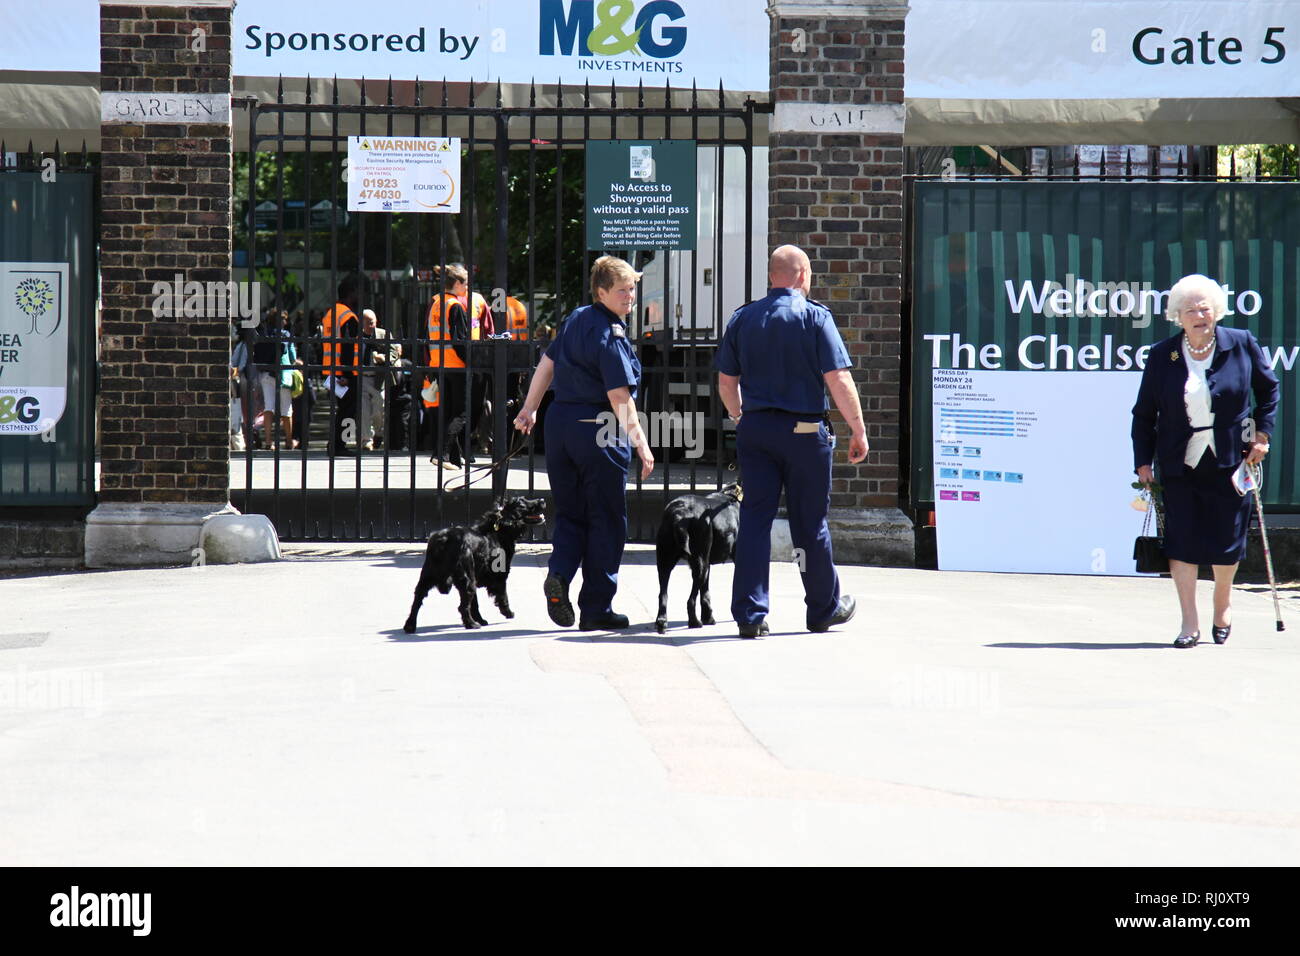 Event security, police and police sniffer Dogs working at the Royal Horticultural flower show [ Chelsea flower show ] in London. Patron. Advertising, lettering. Culture. British culture. Cultural events. Annual event. Stock Photo